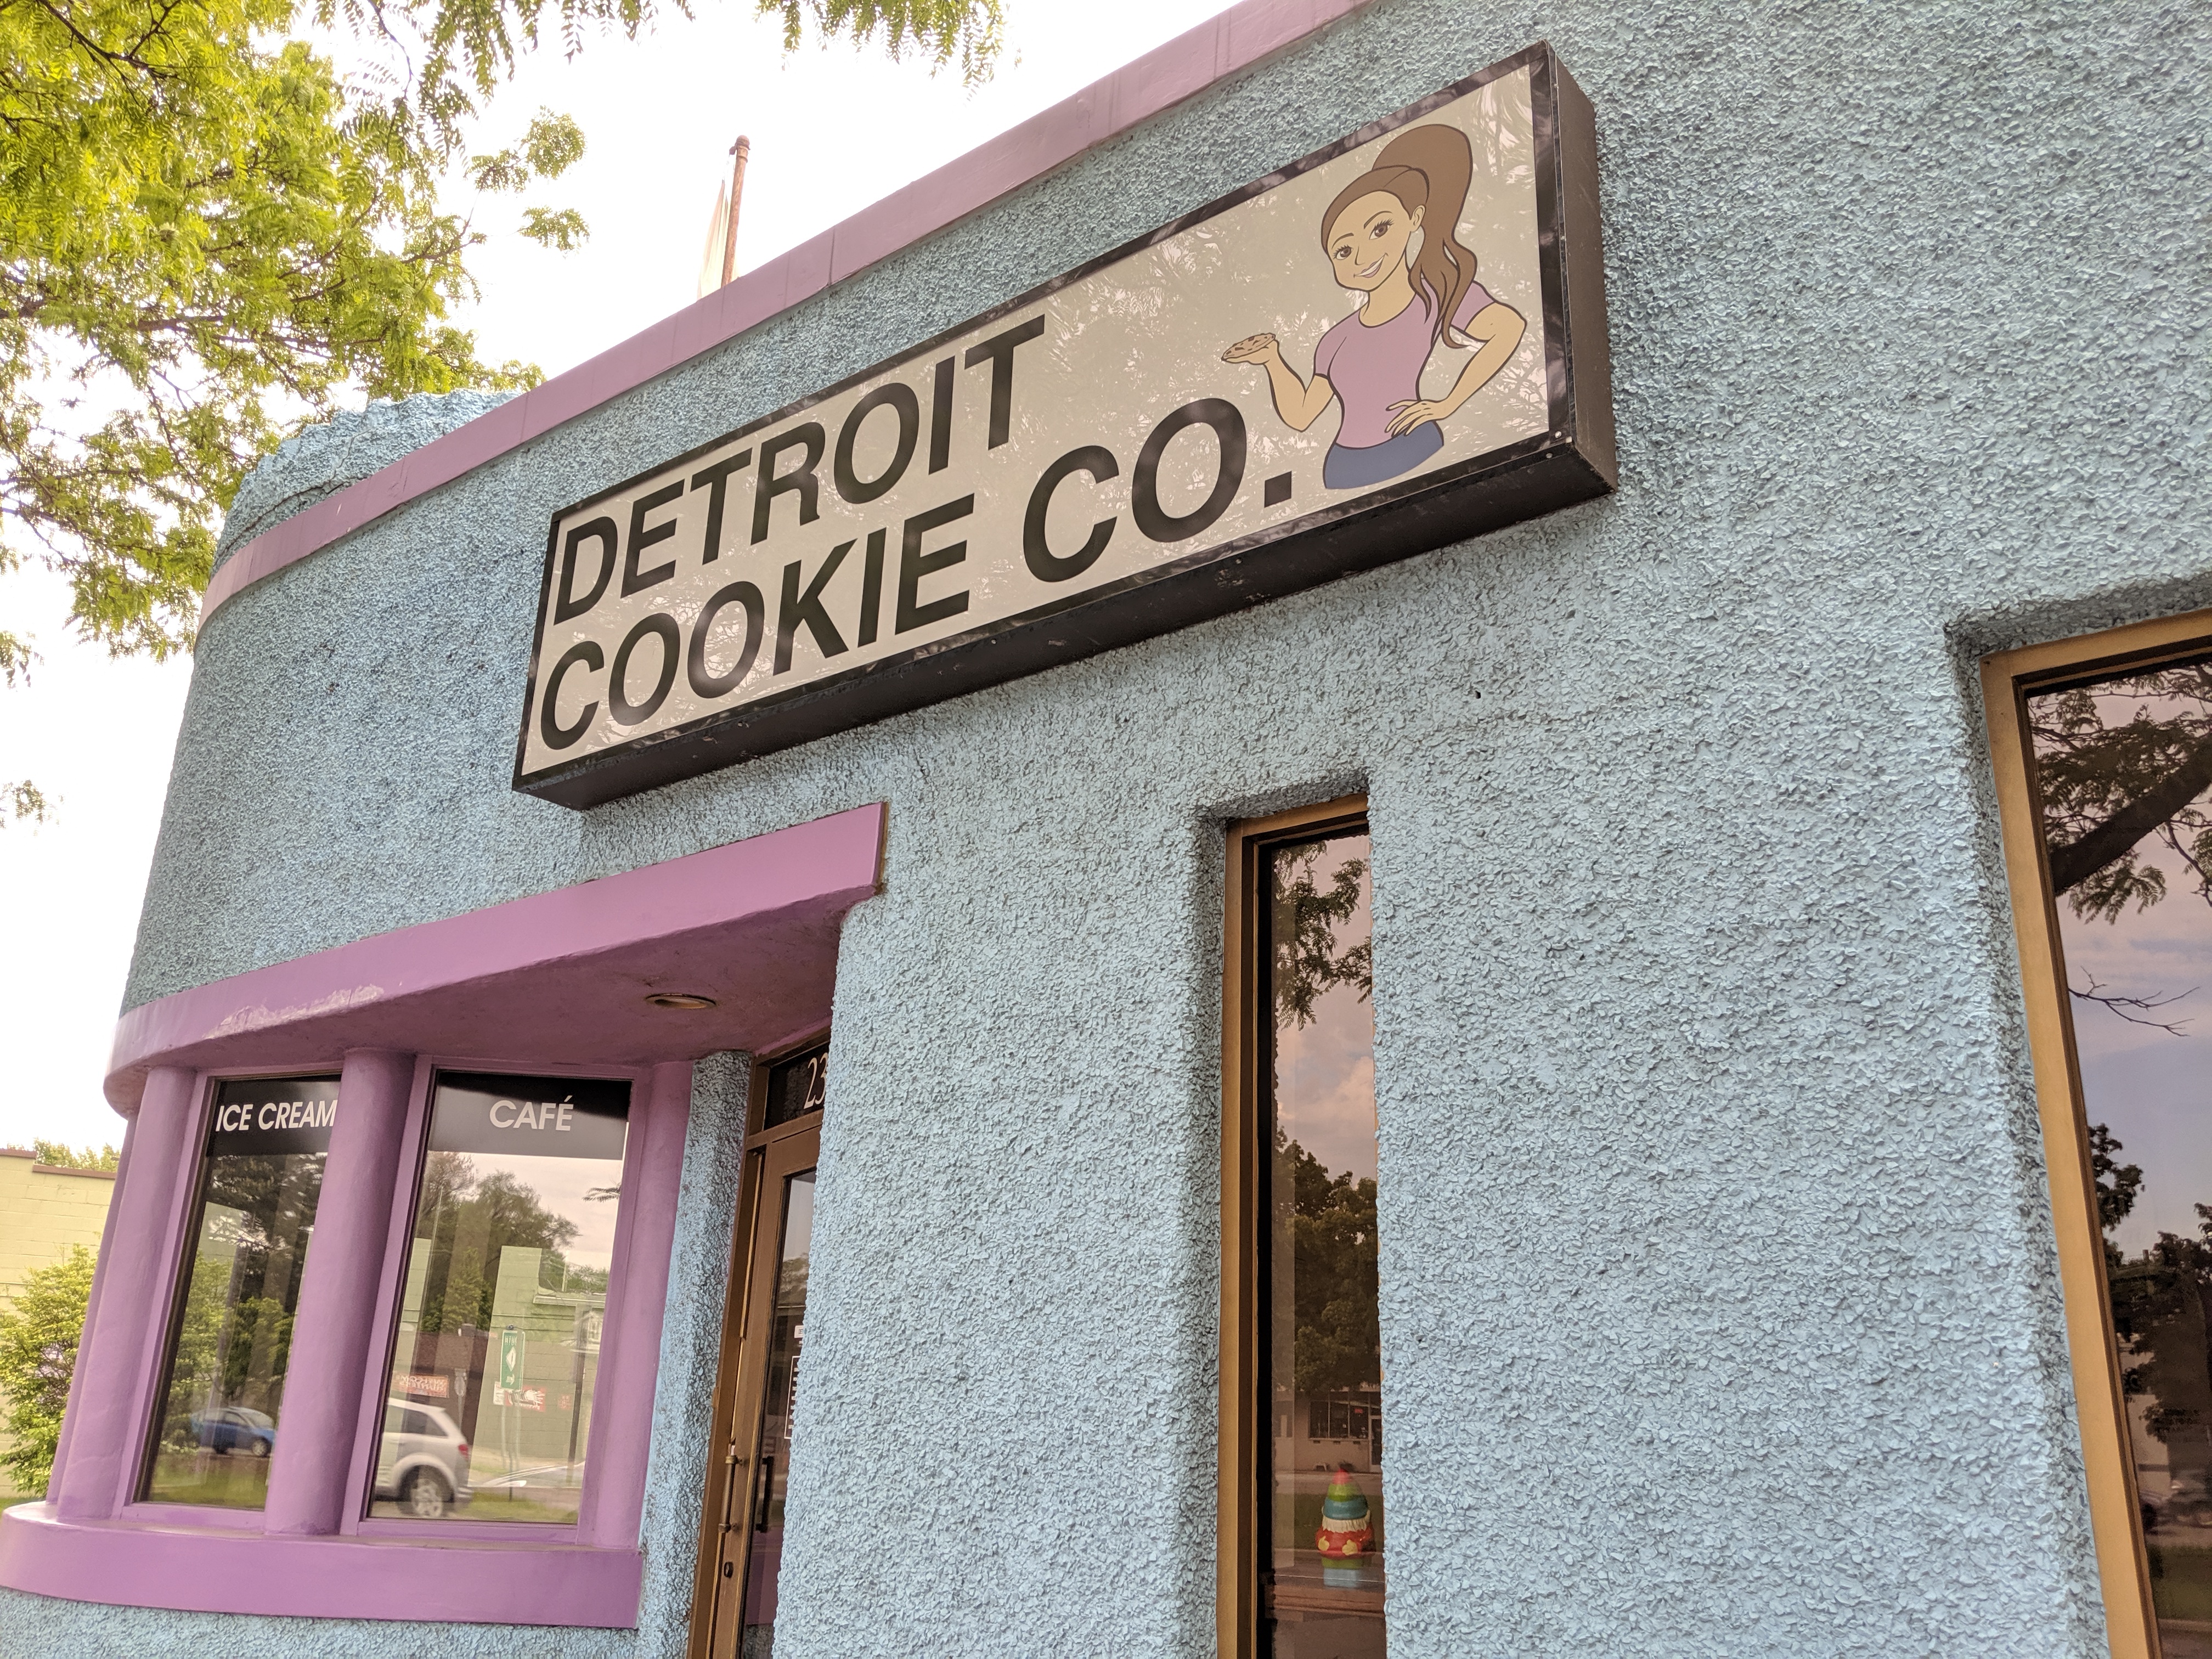 Image of exterior of Detroit Cookie Co.